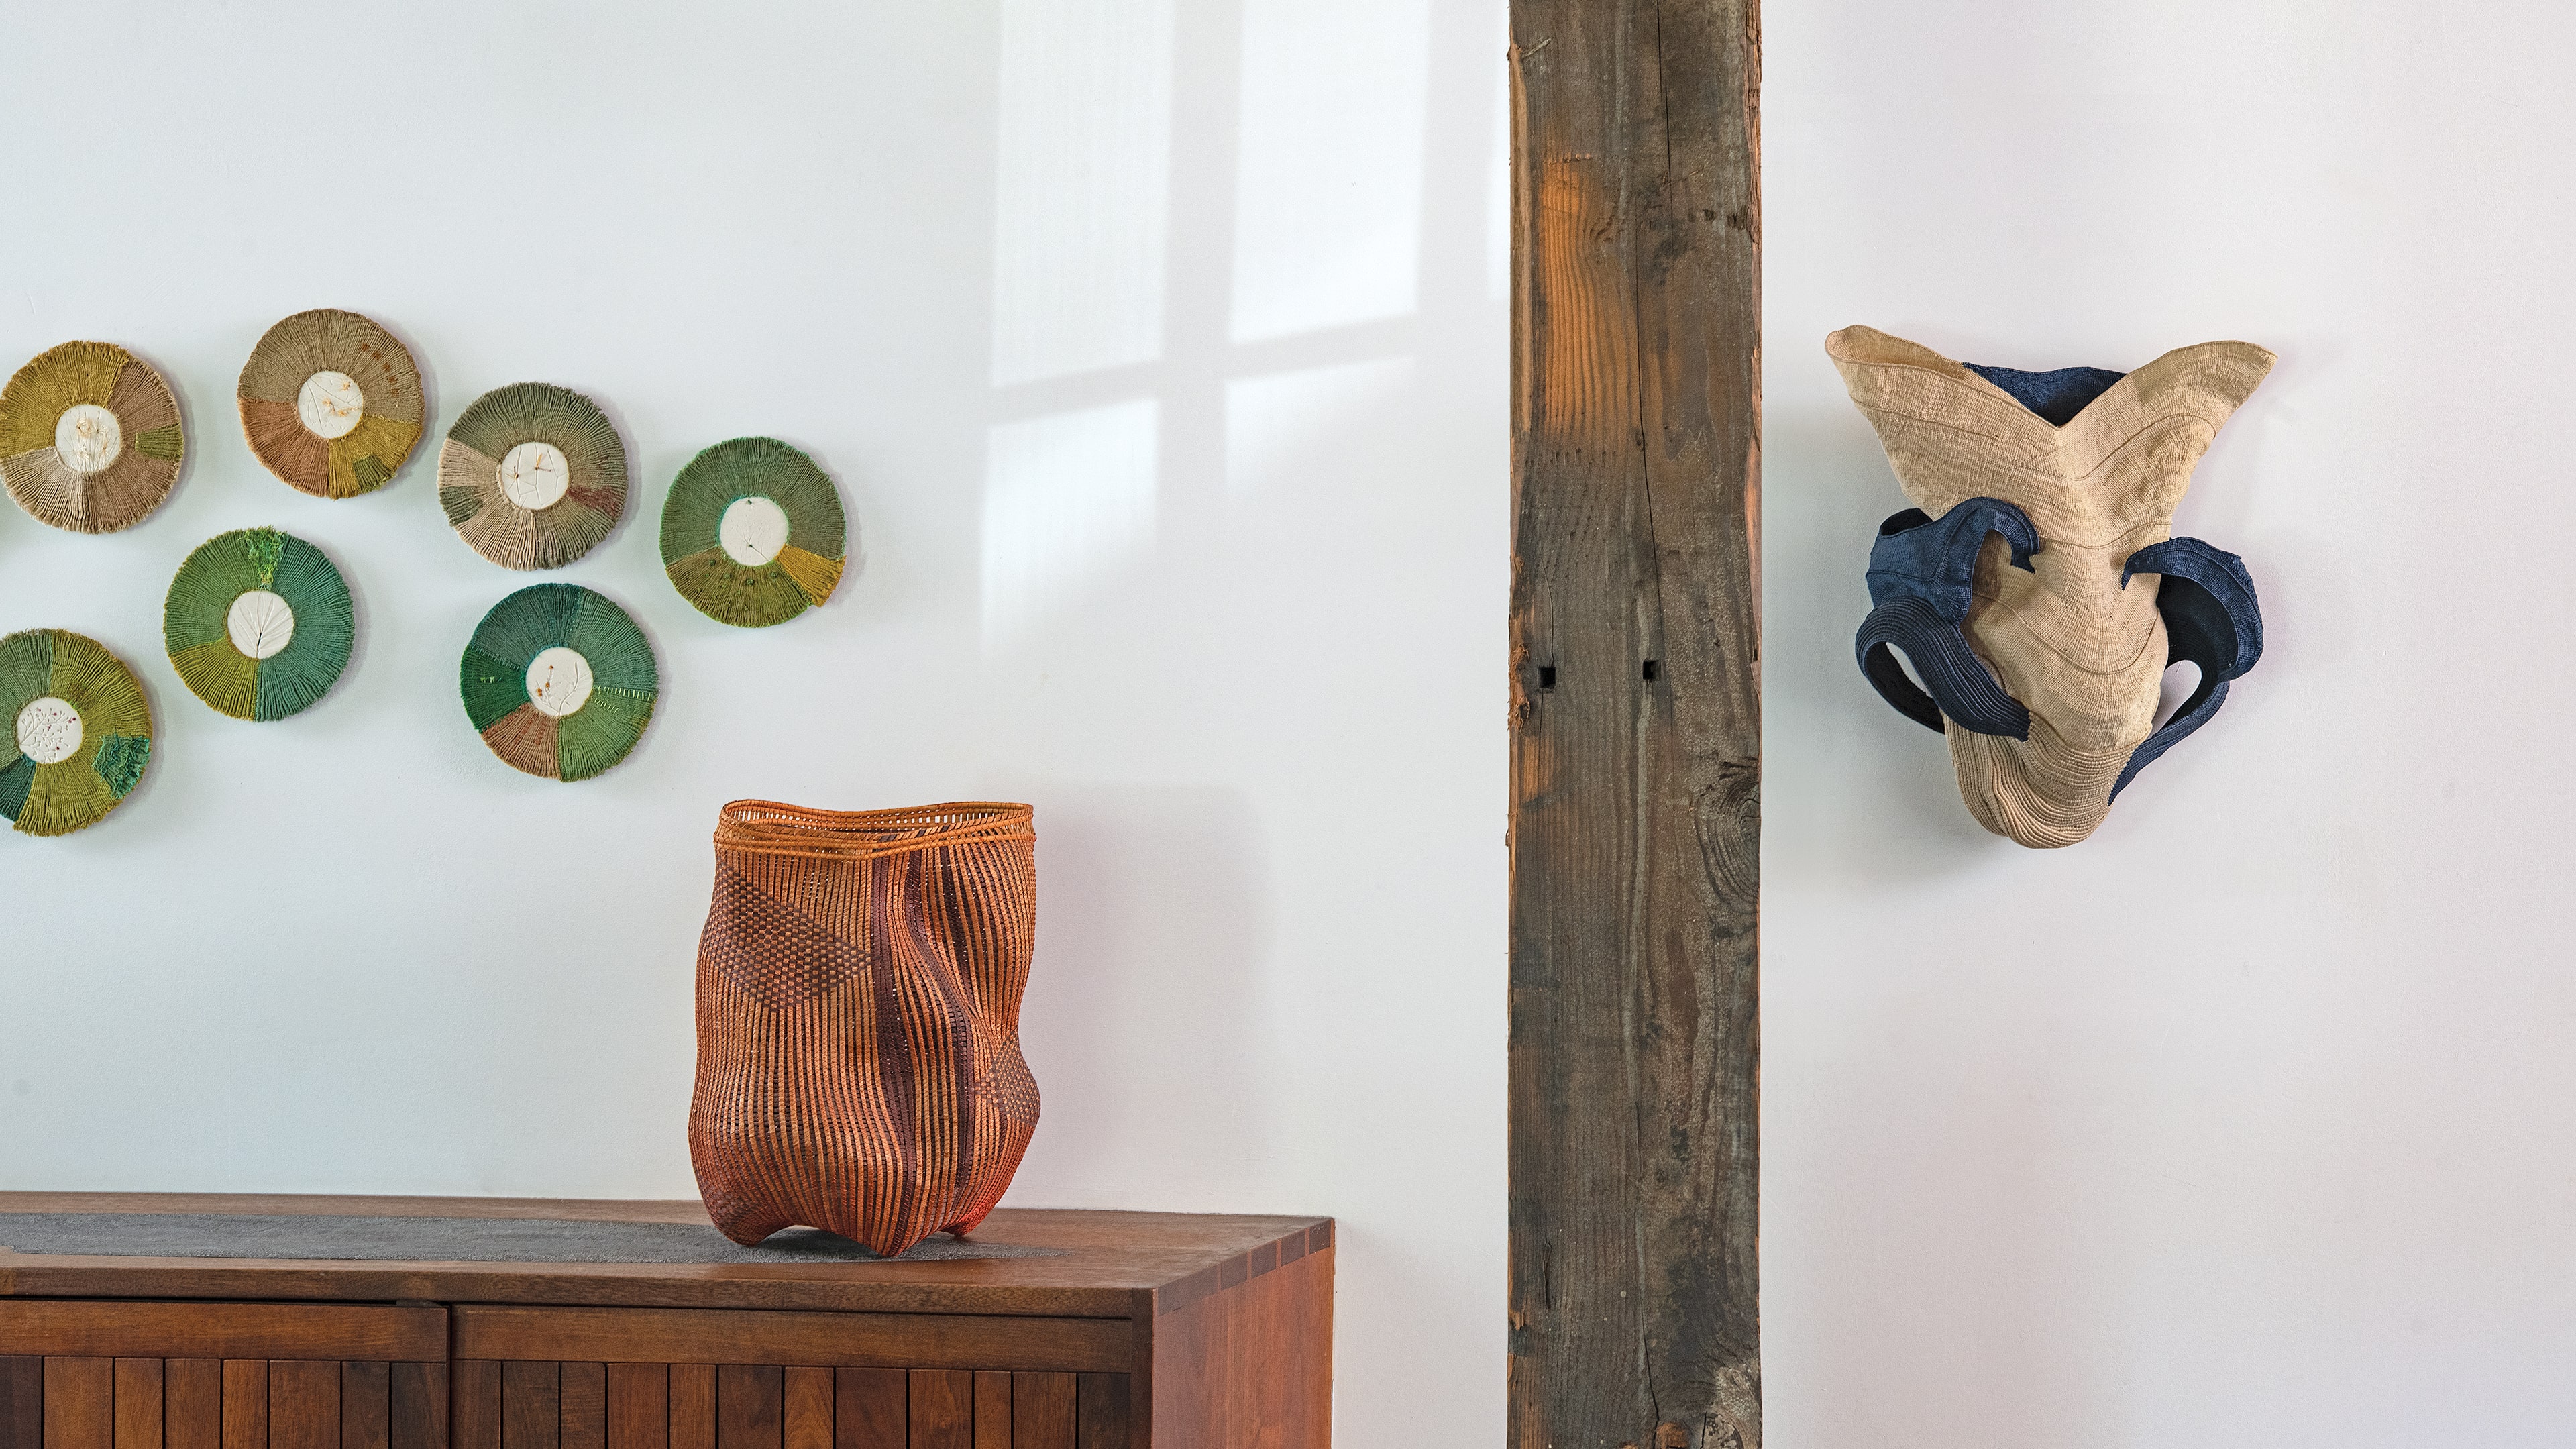 works by Caroline Bartlett, Polly Adams Sutton and Ferne Jacobs